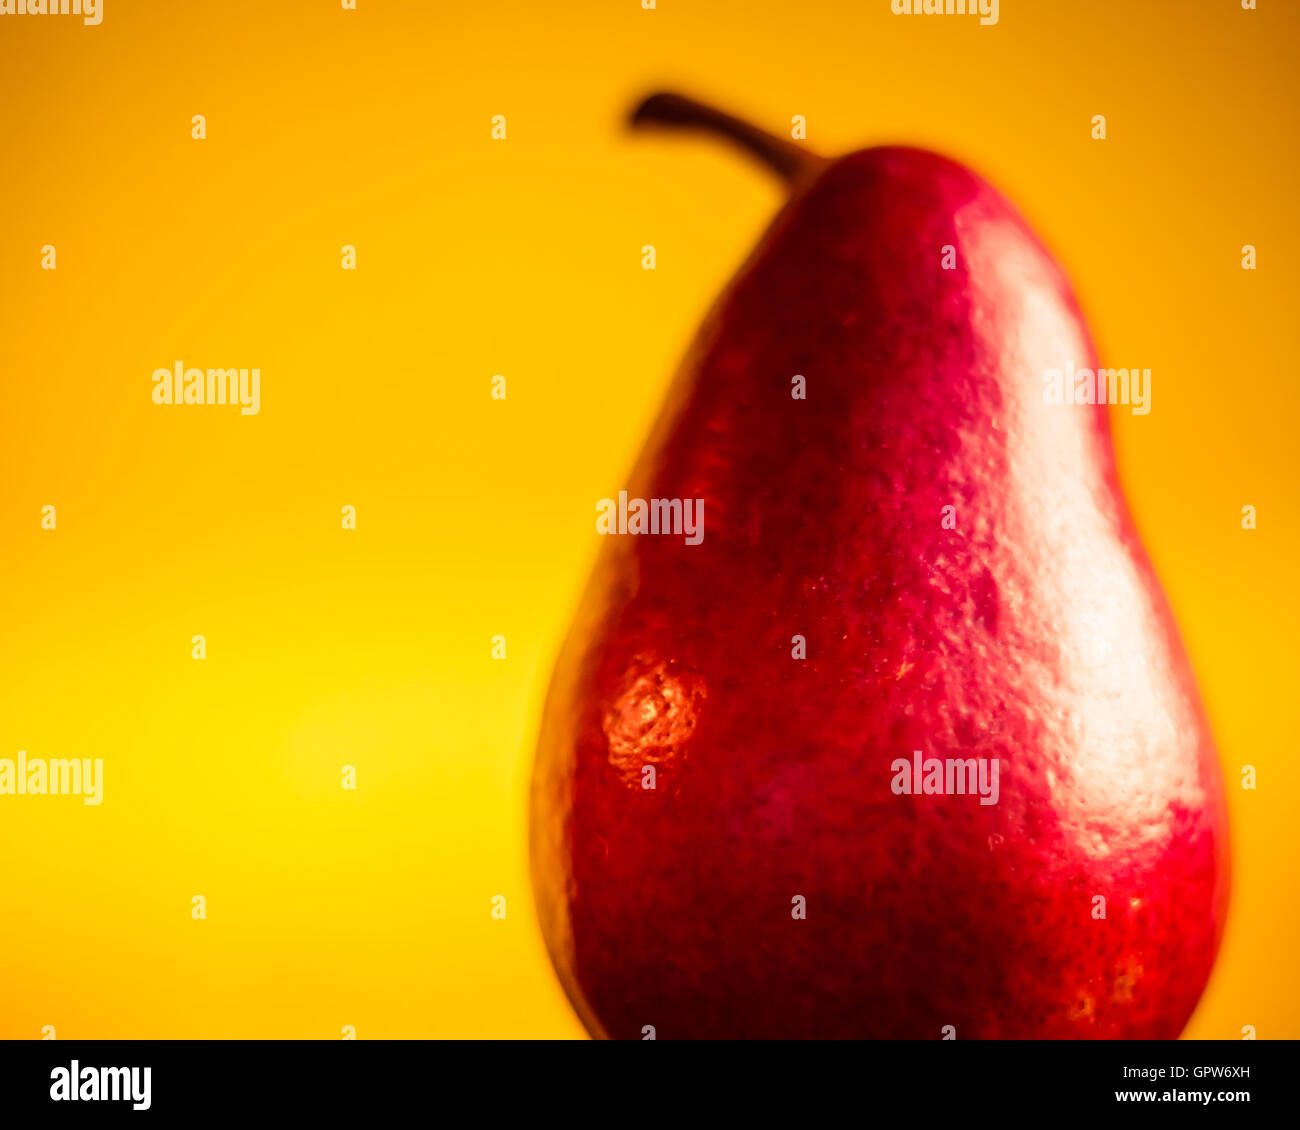 A close up of perfect red Anjou Pear against a yellow background. Stock Photo